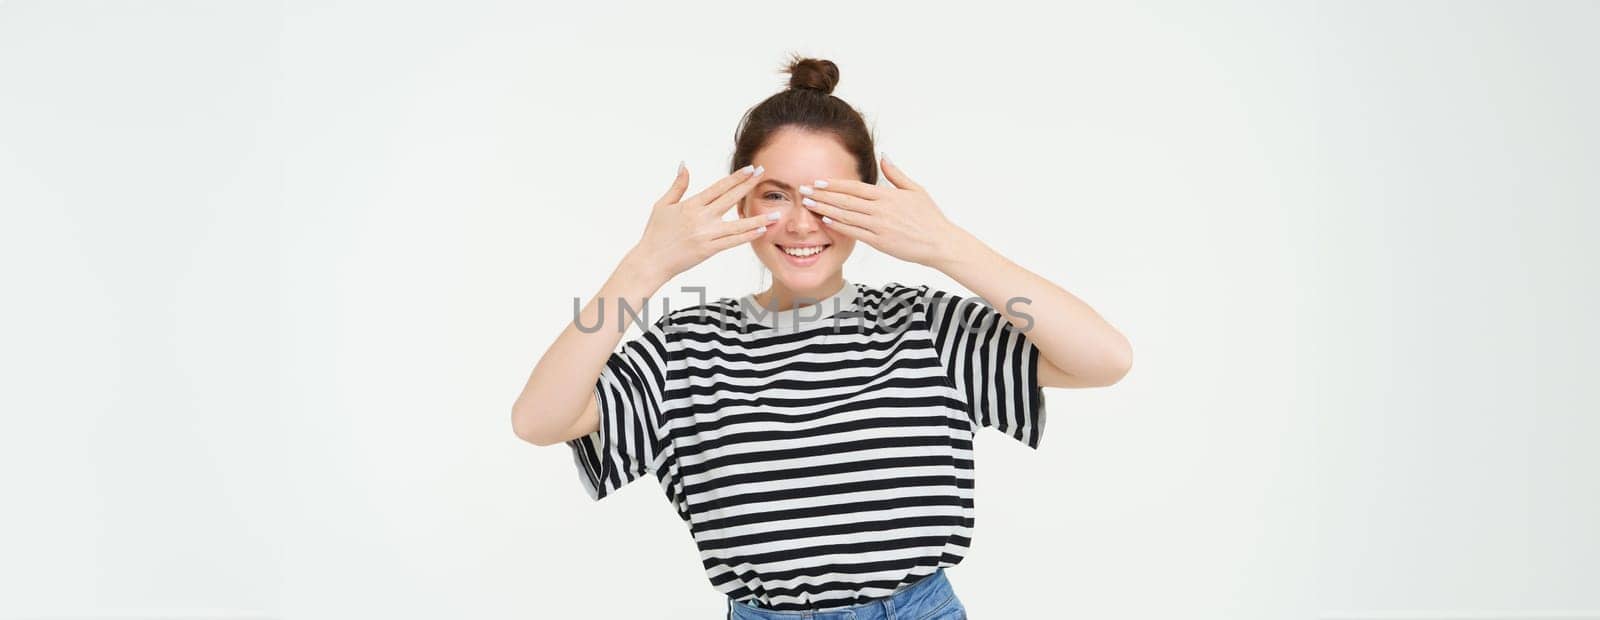 Portrait of girl waiting for surprise, covers eyes with hands, peeking through fingers, stands over white background.